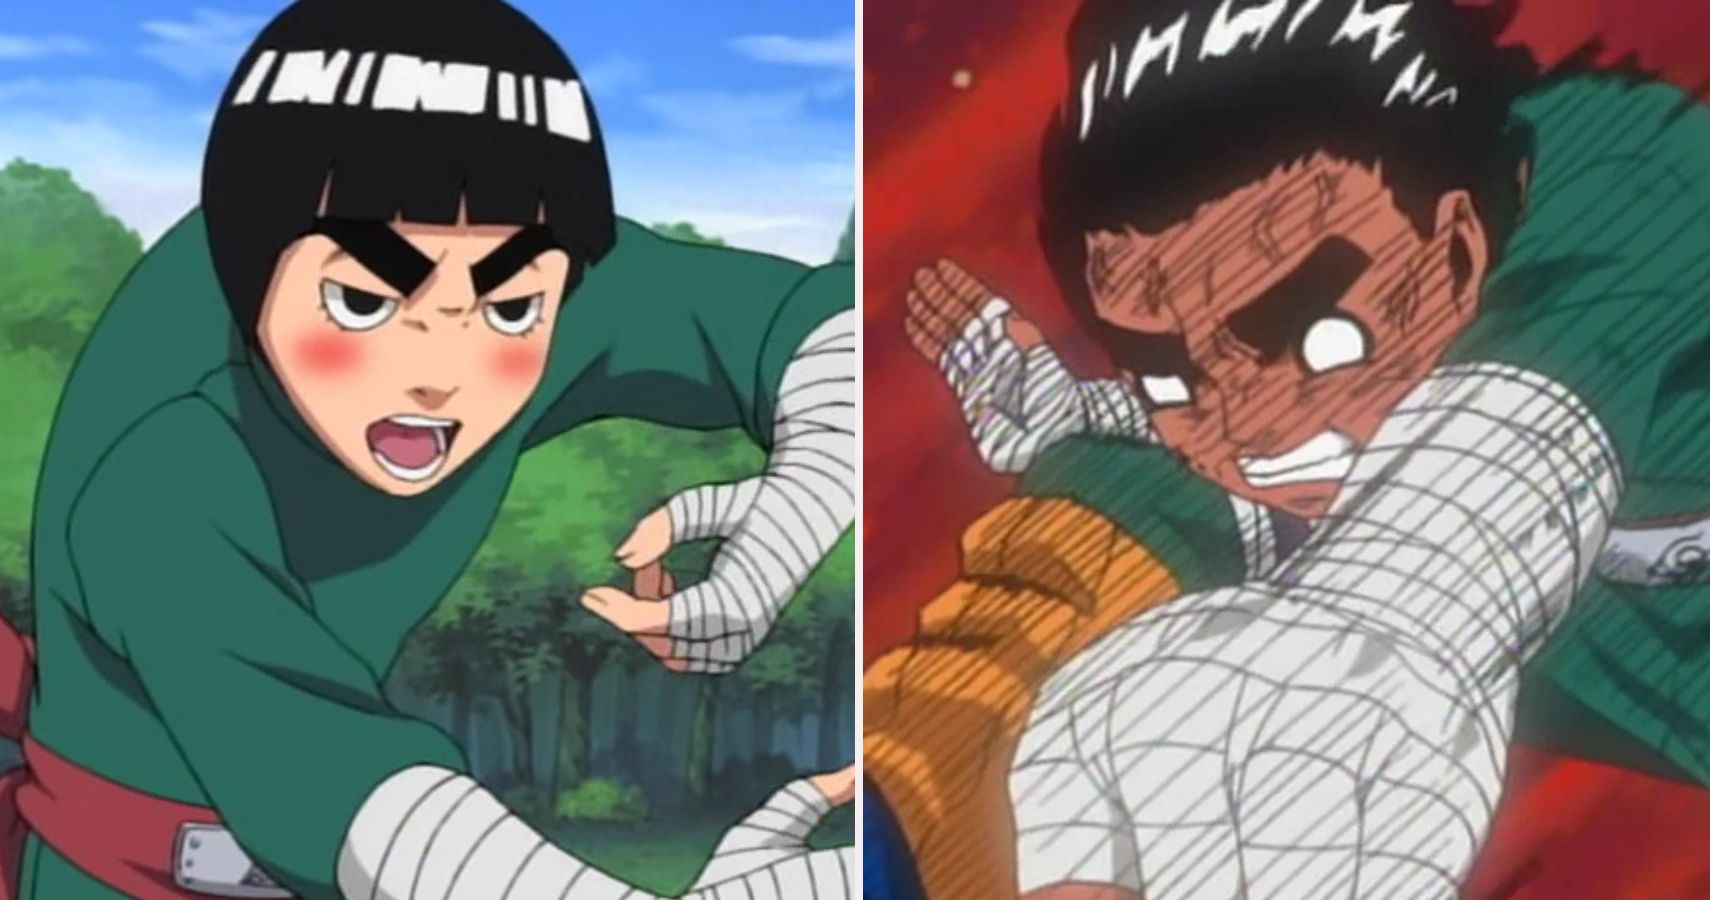 Is Lee more powerful than Naruto?